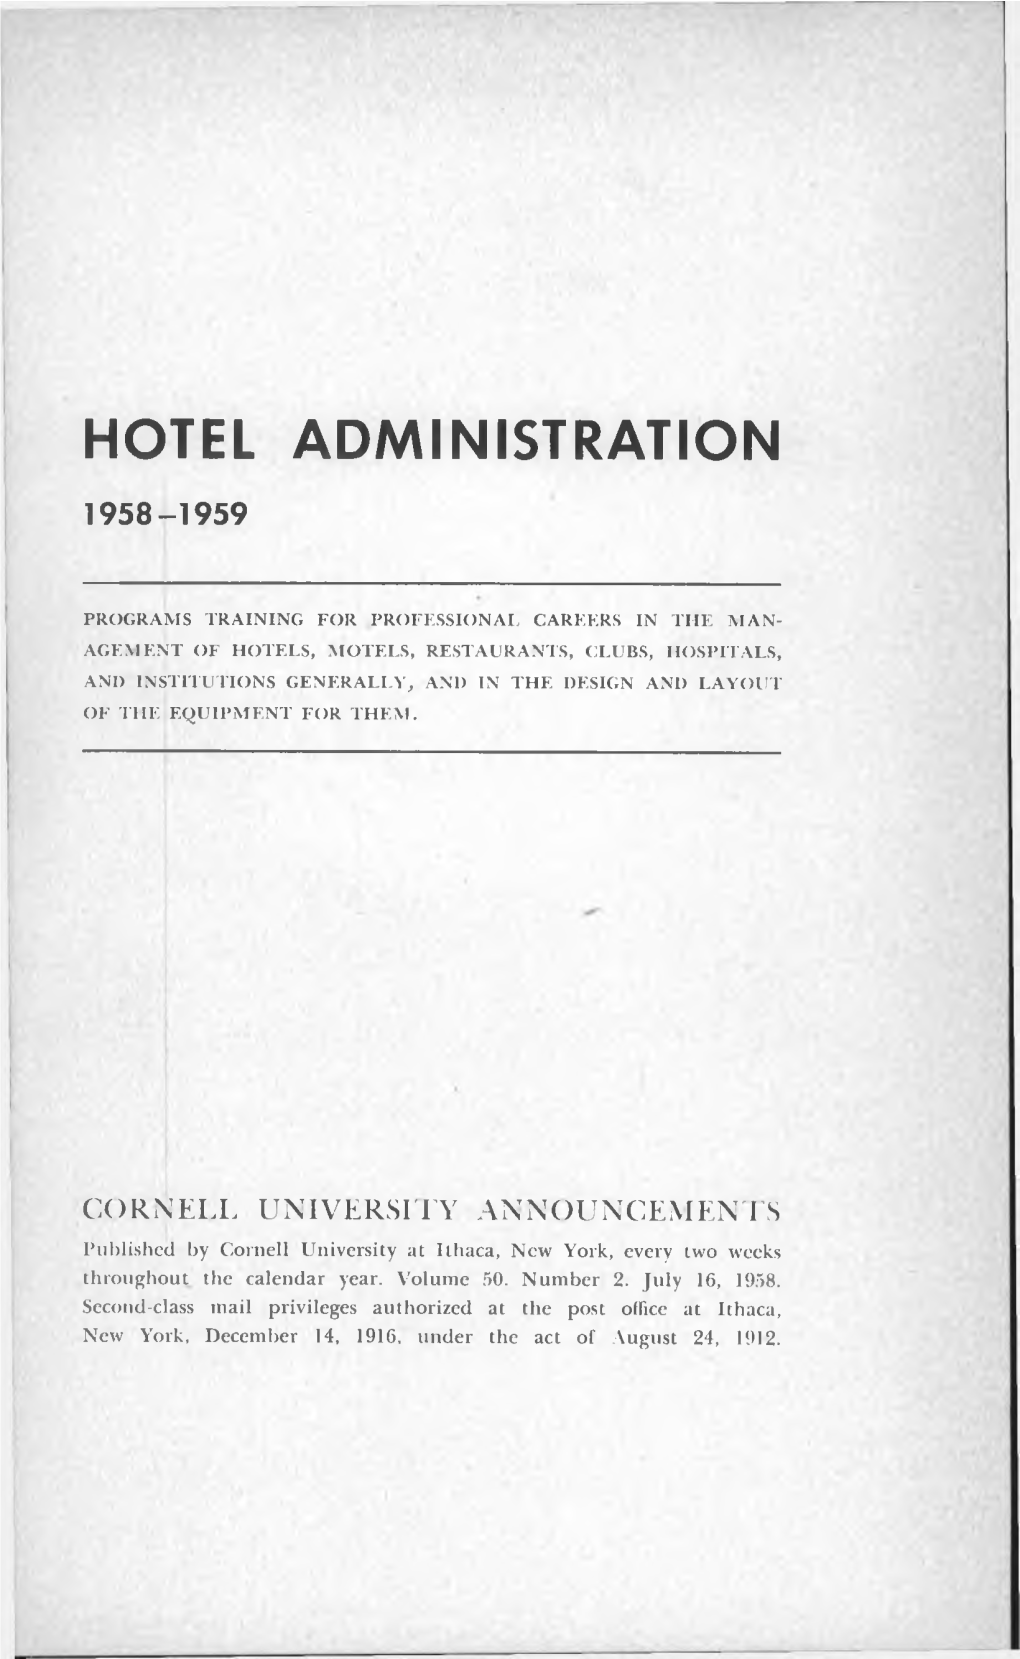 Hotel Administration 1958-1959